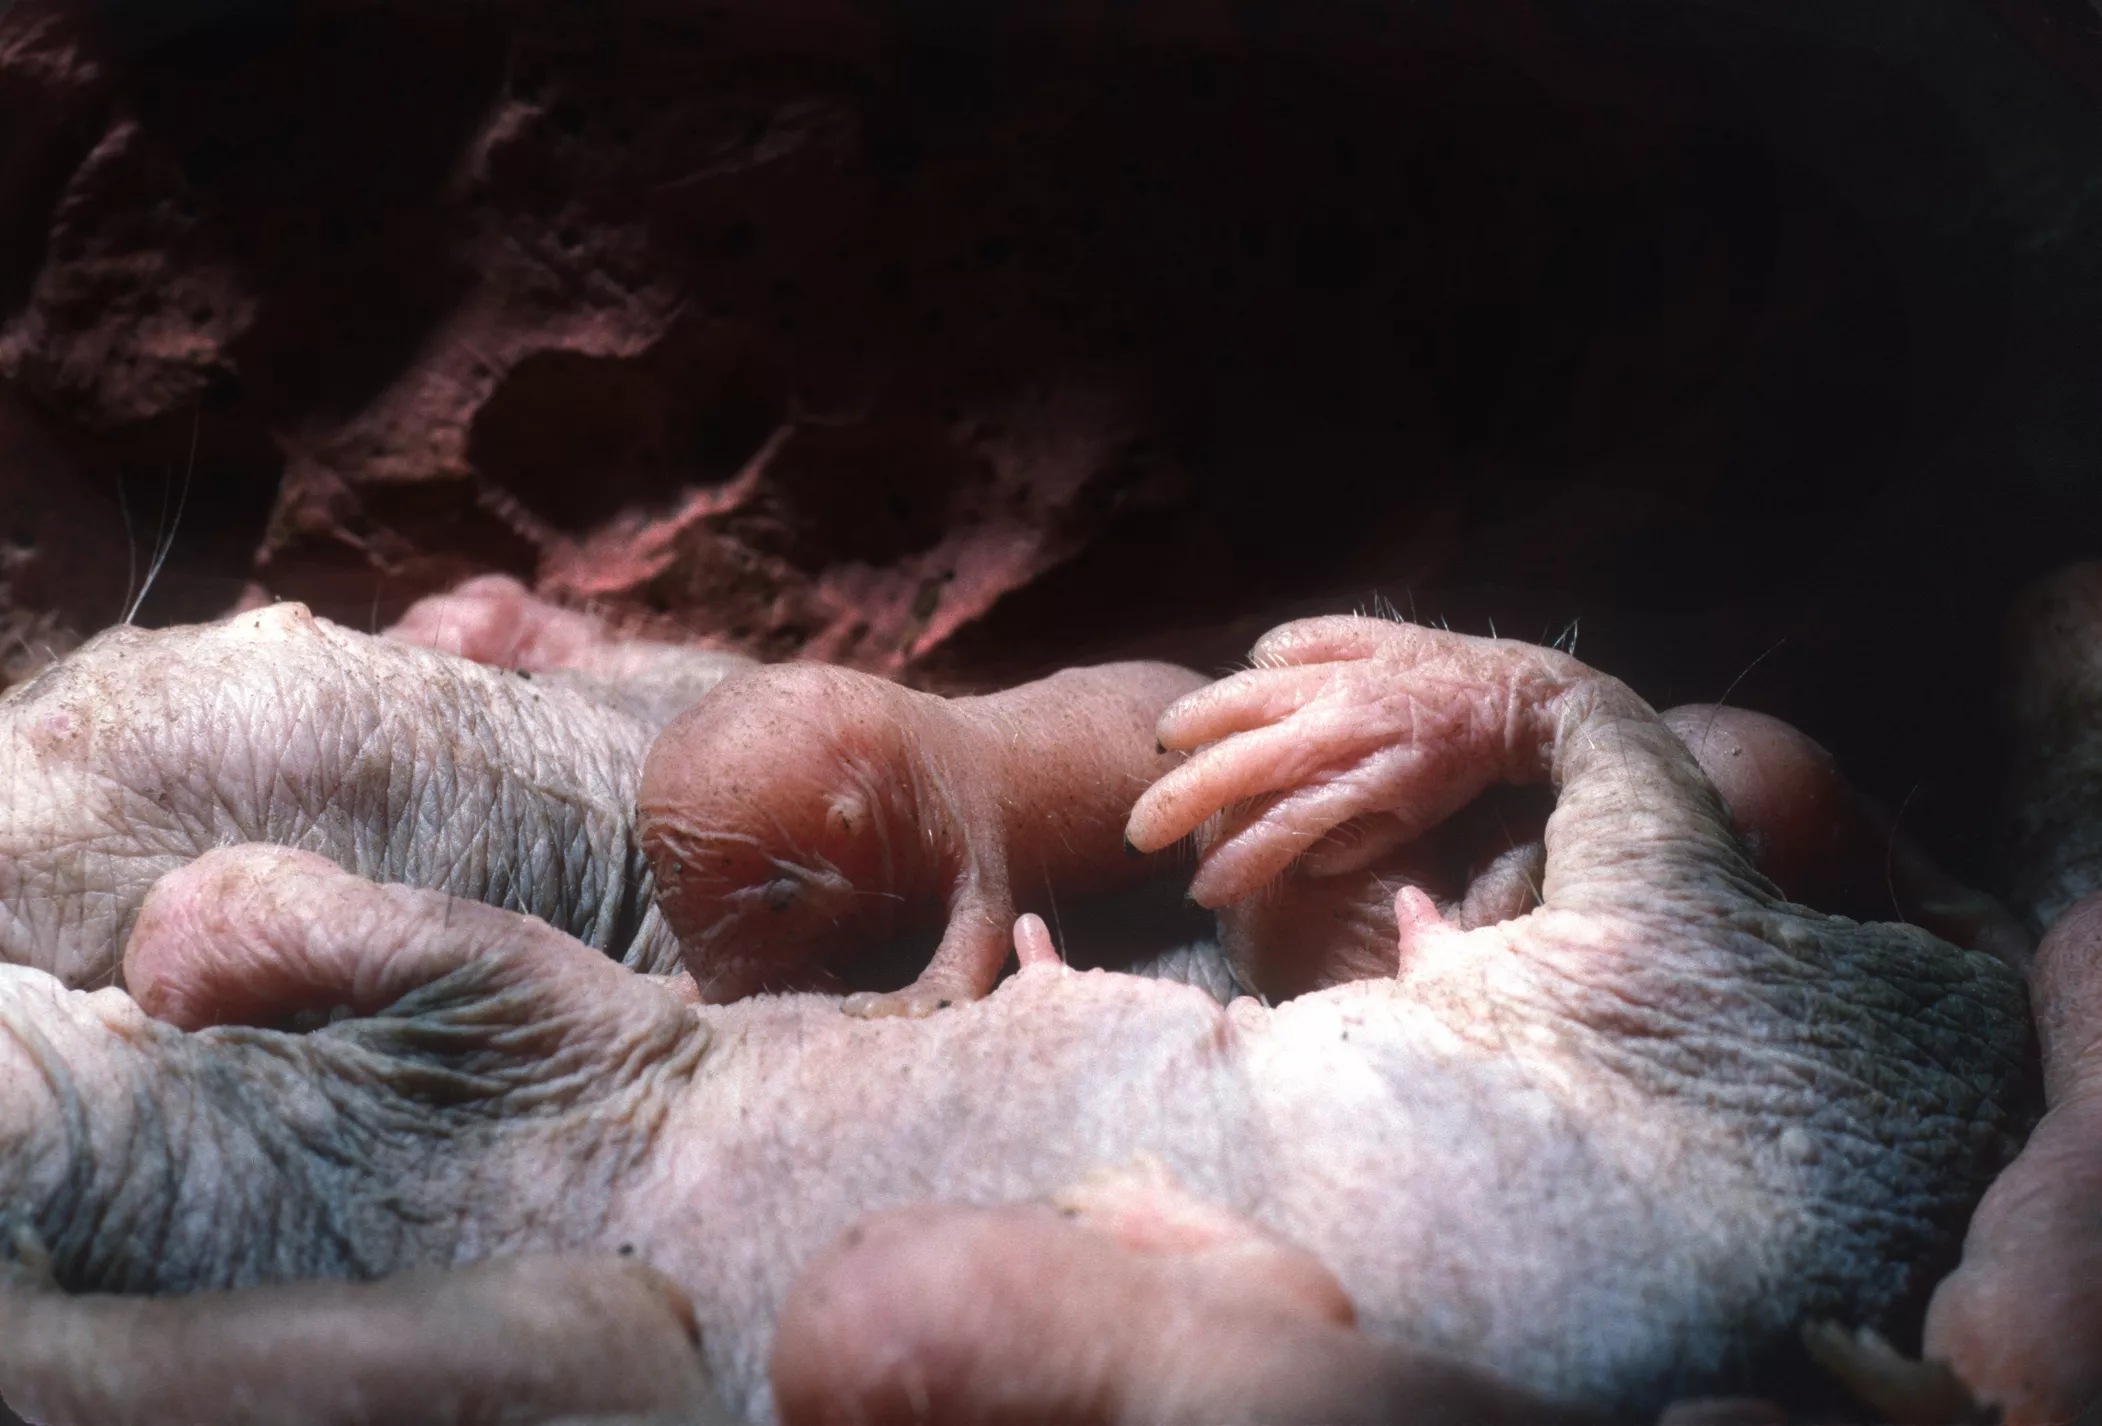 Naked mole rat baby feeding from mother.